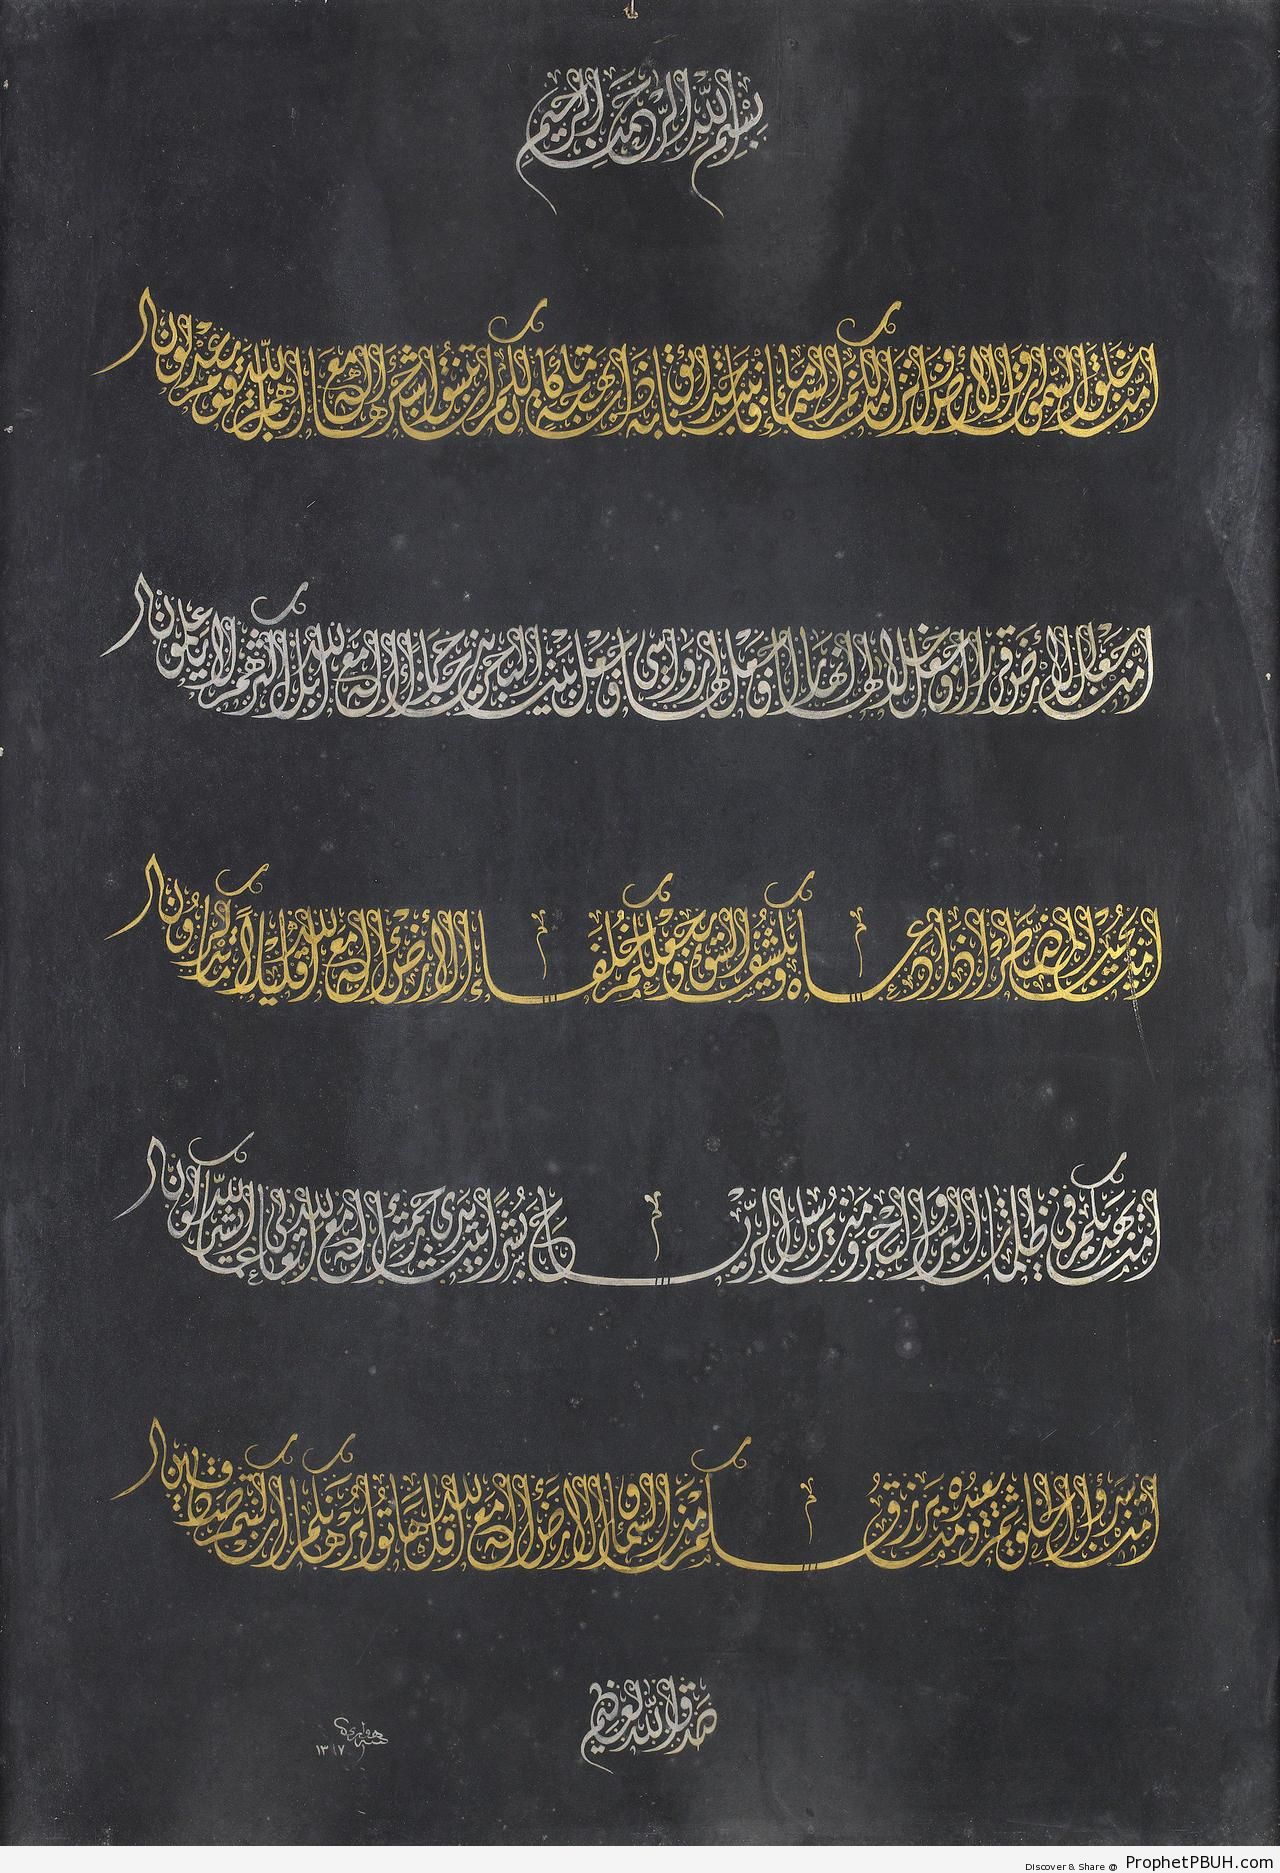 Quran 27-60-64 - Surat an-Naml - Islamic Calligraphy and Typography 